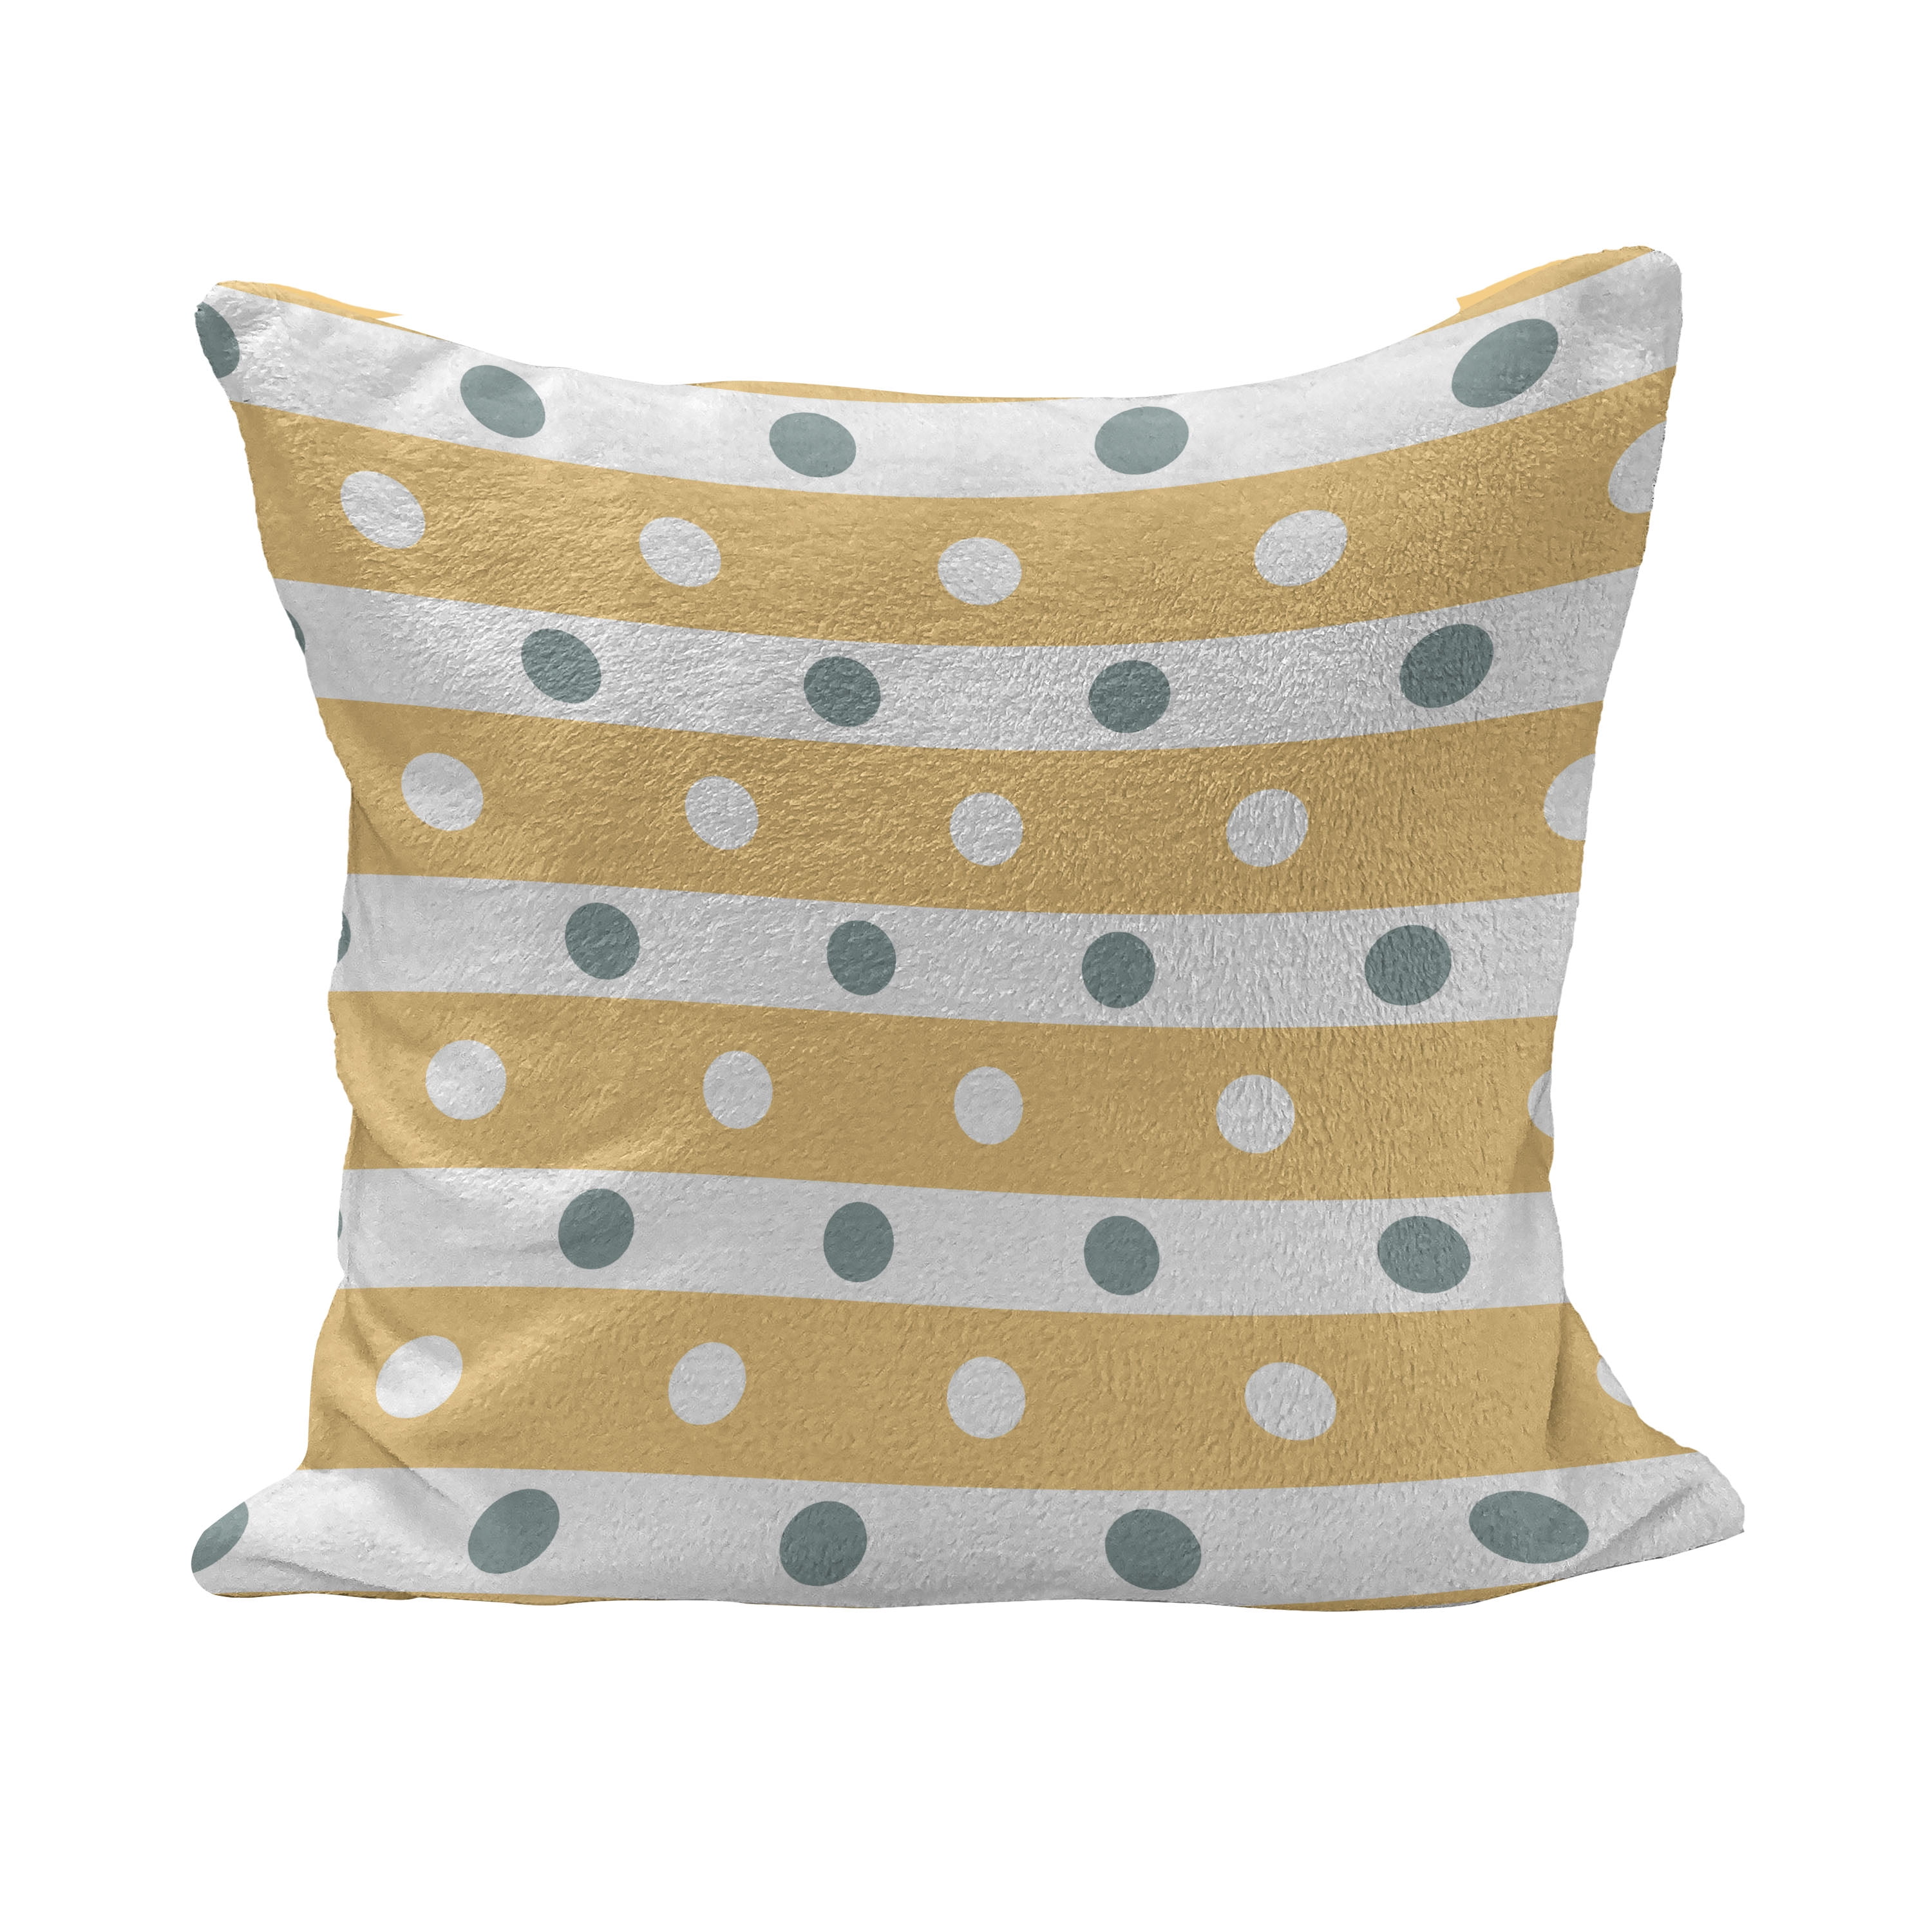 18x18 Design Minds Boutique Polka Dots and Stripes Pattern Throw Pillow Multicolor Slate Gray/White/Black 